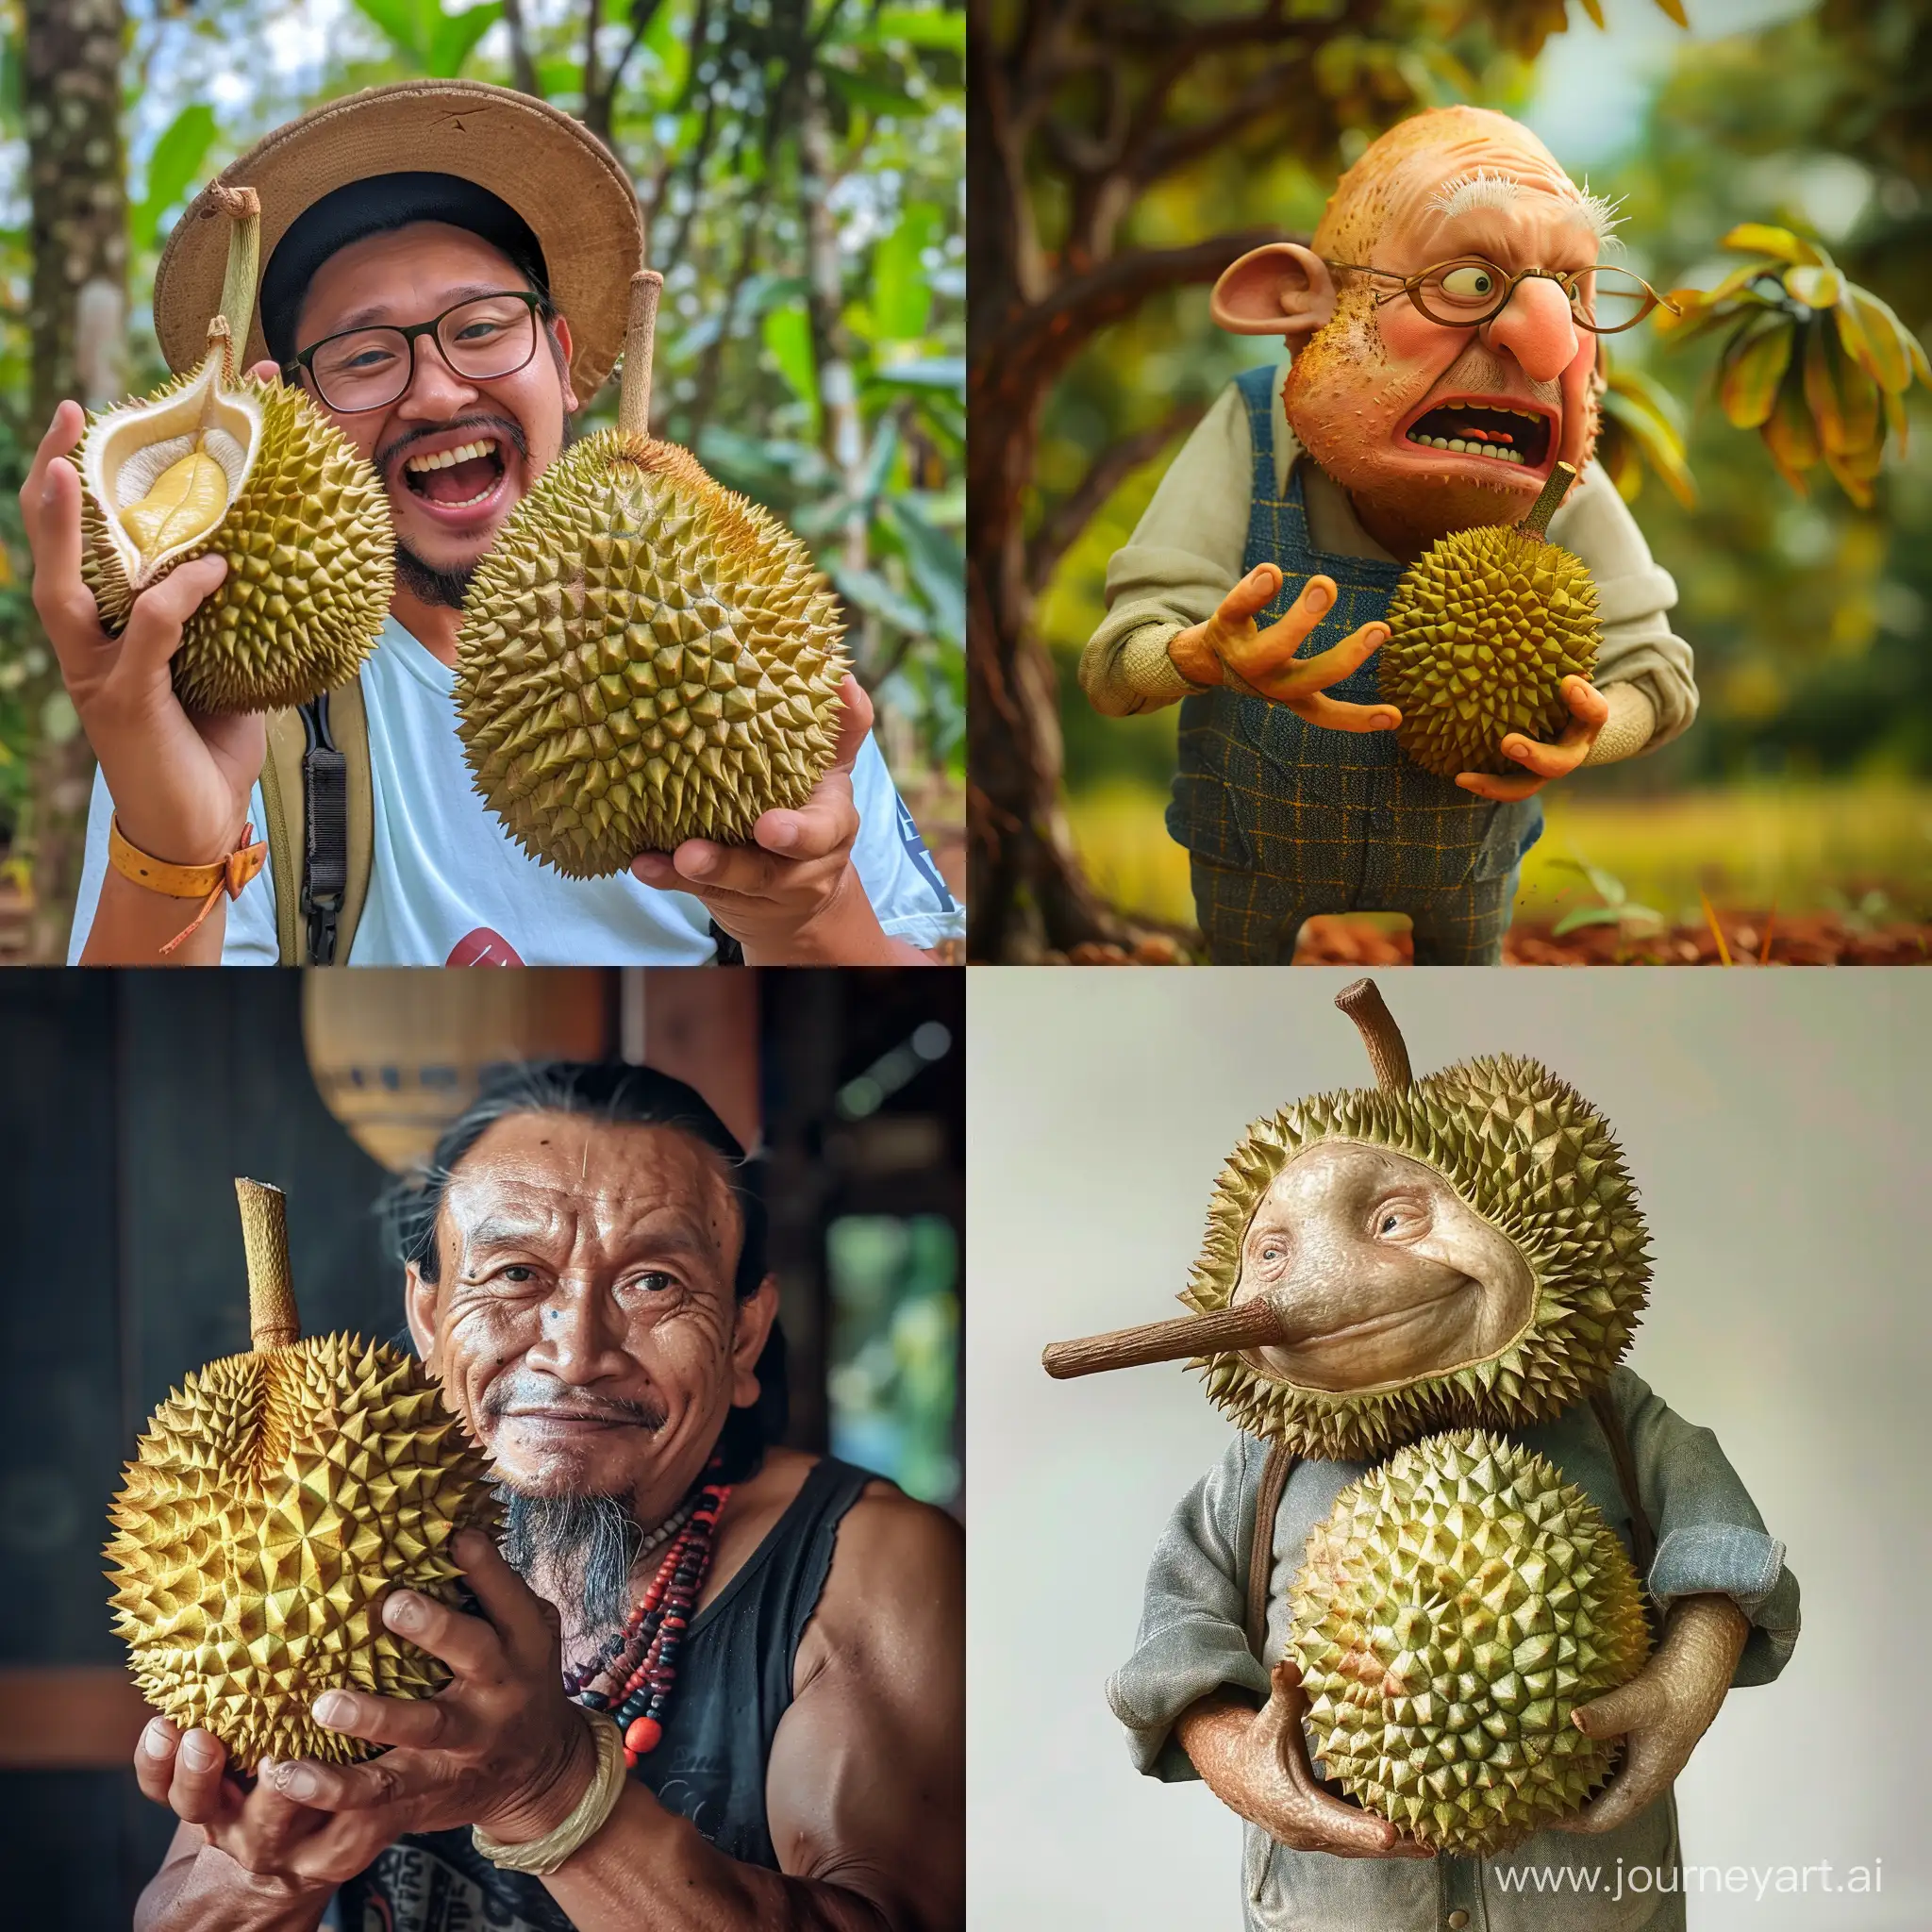 Clumsy-Person-with-Durian-Fruit-Humorous-and-Colorful-Image